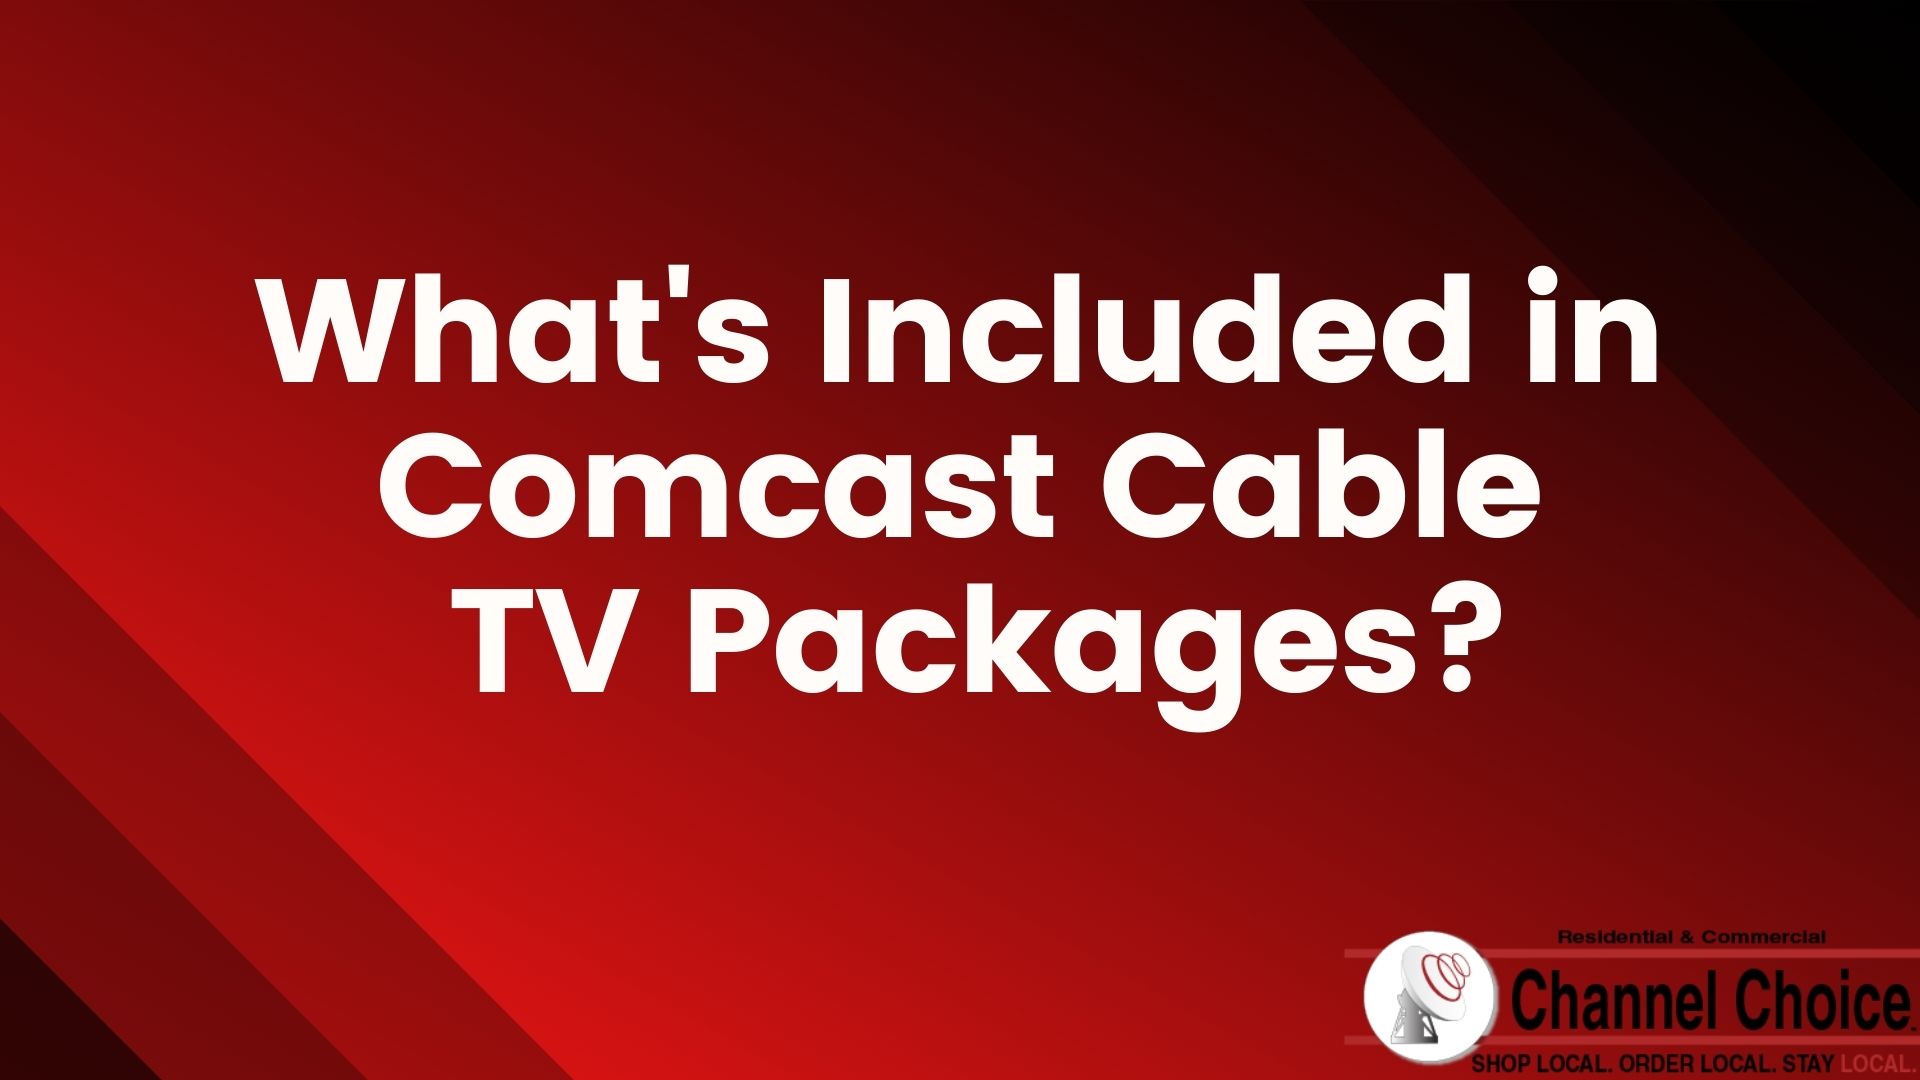 comcast internet and cable deals